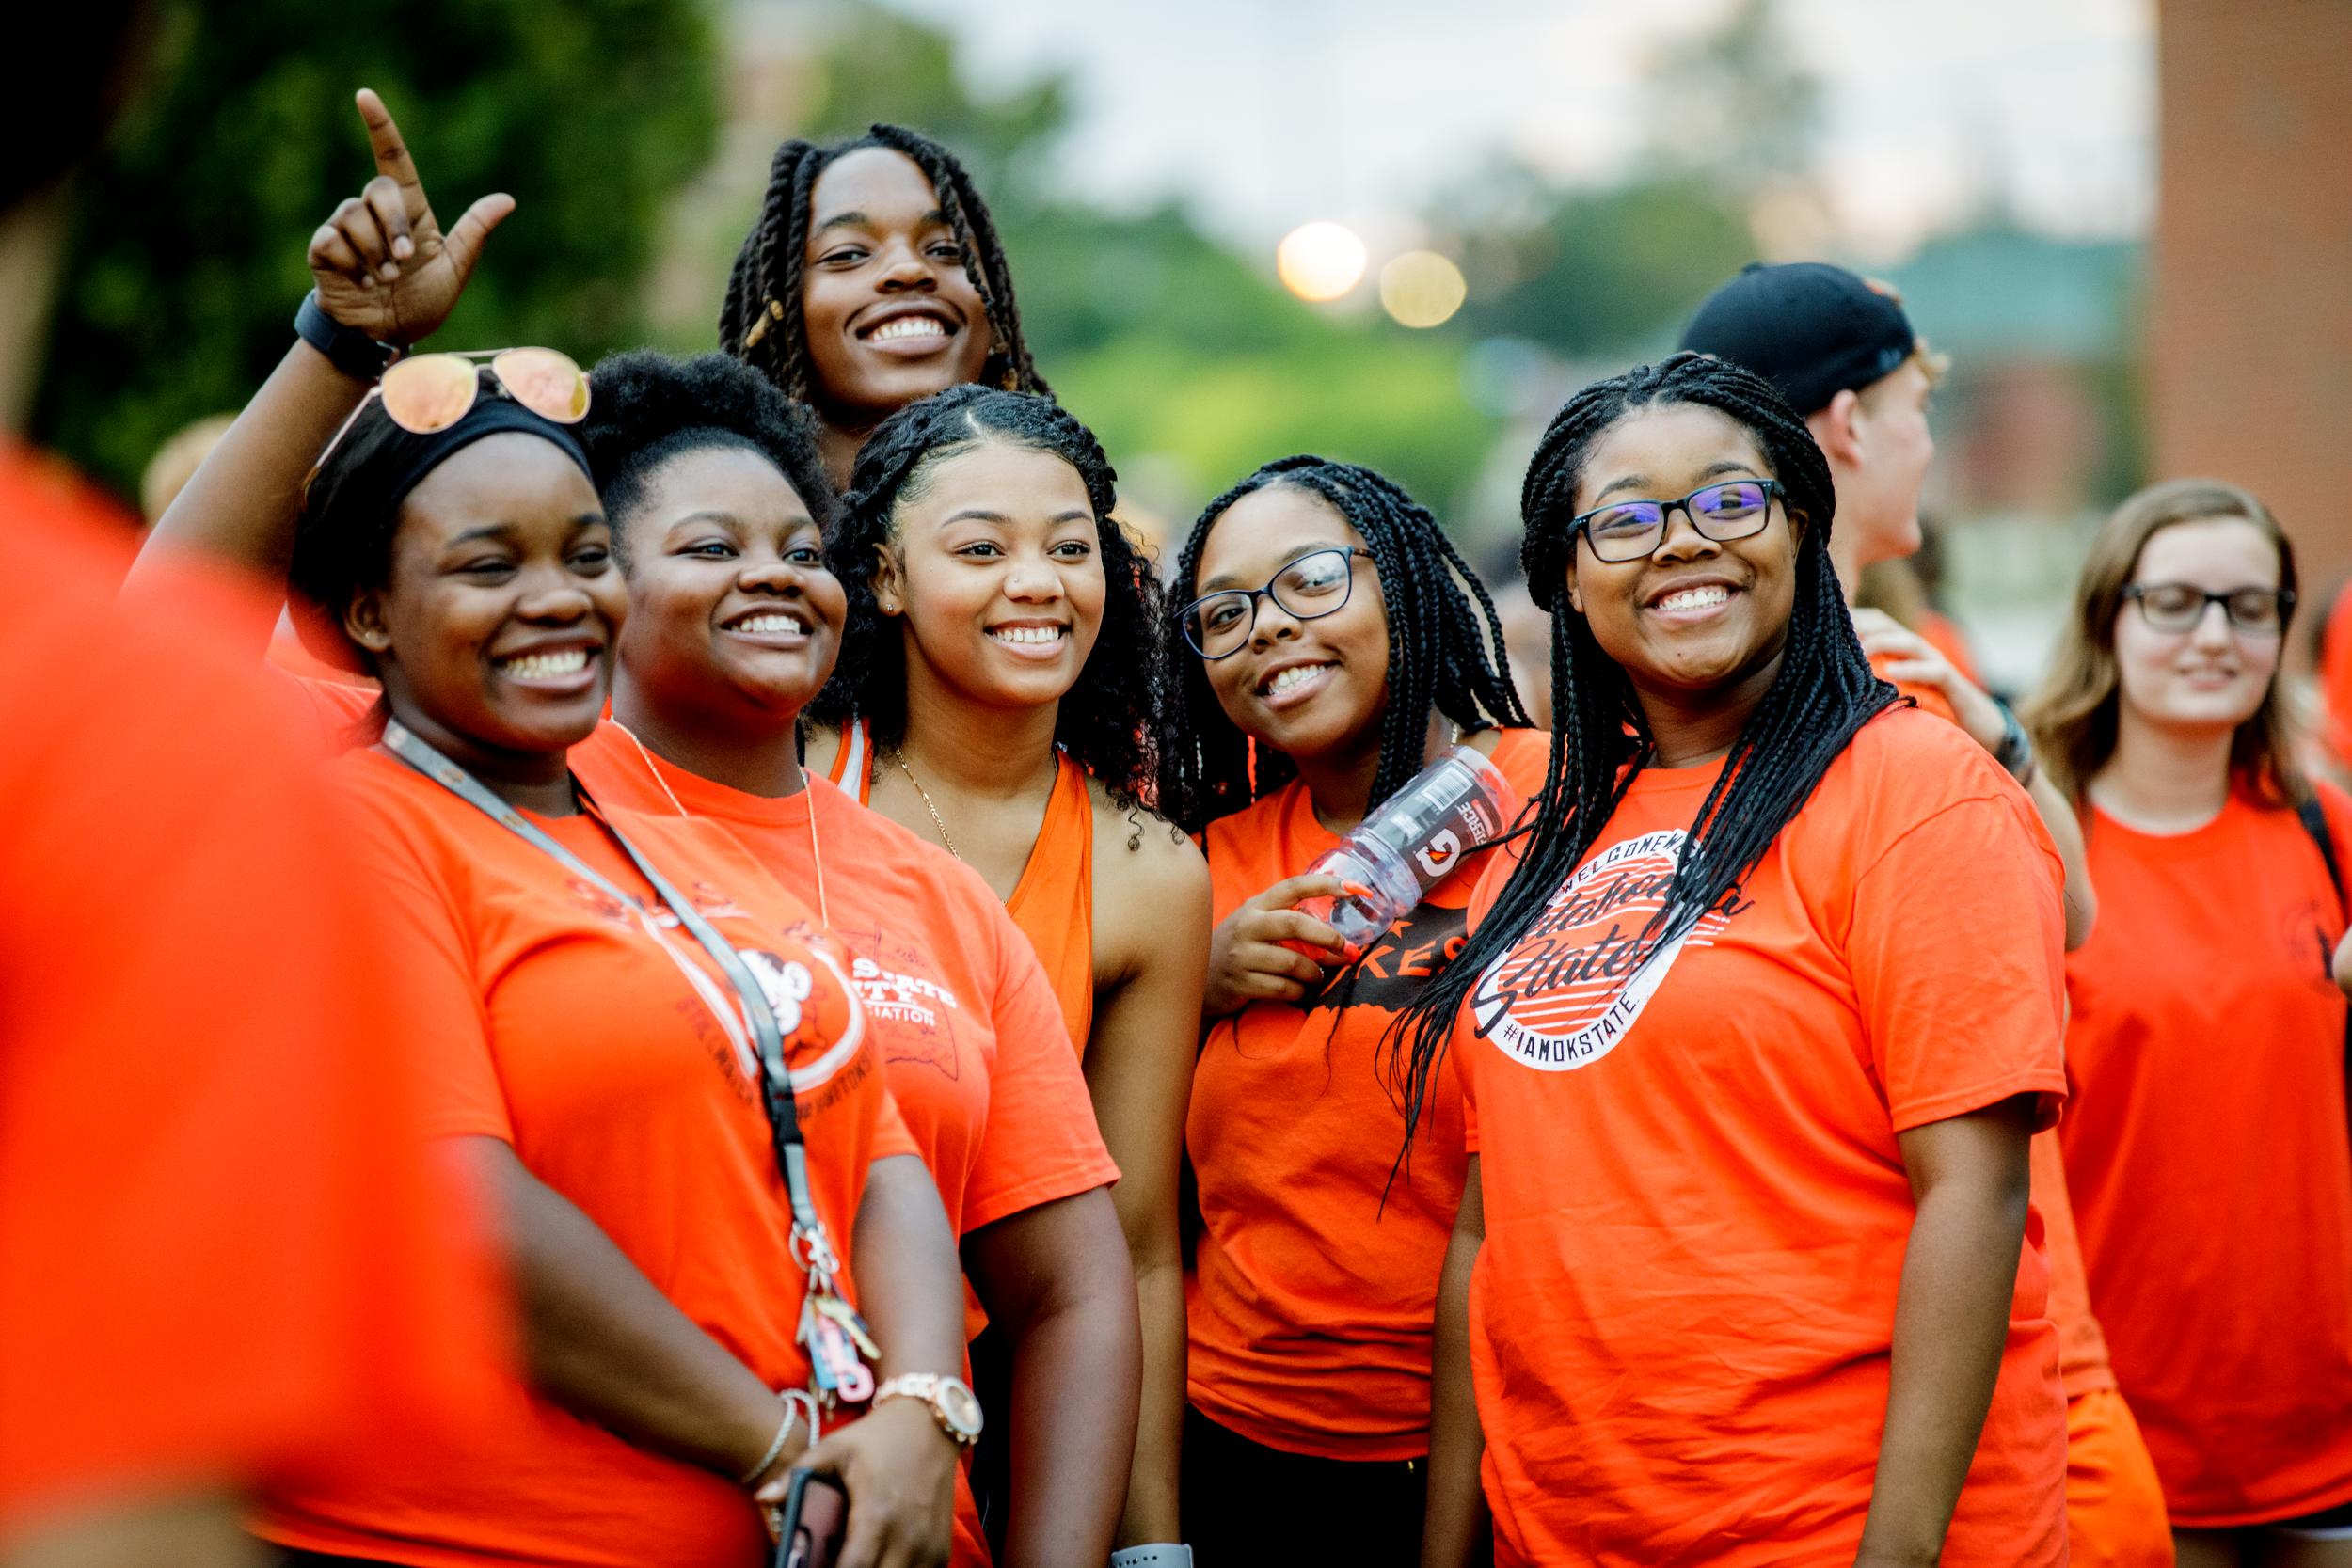 A group of OSU students smiling for the photographer